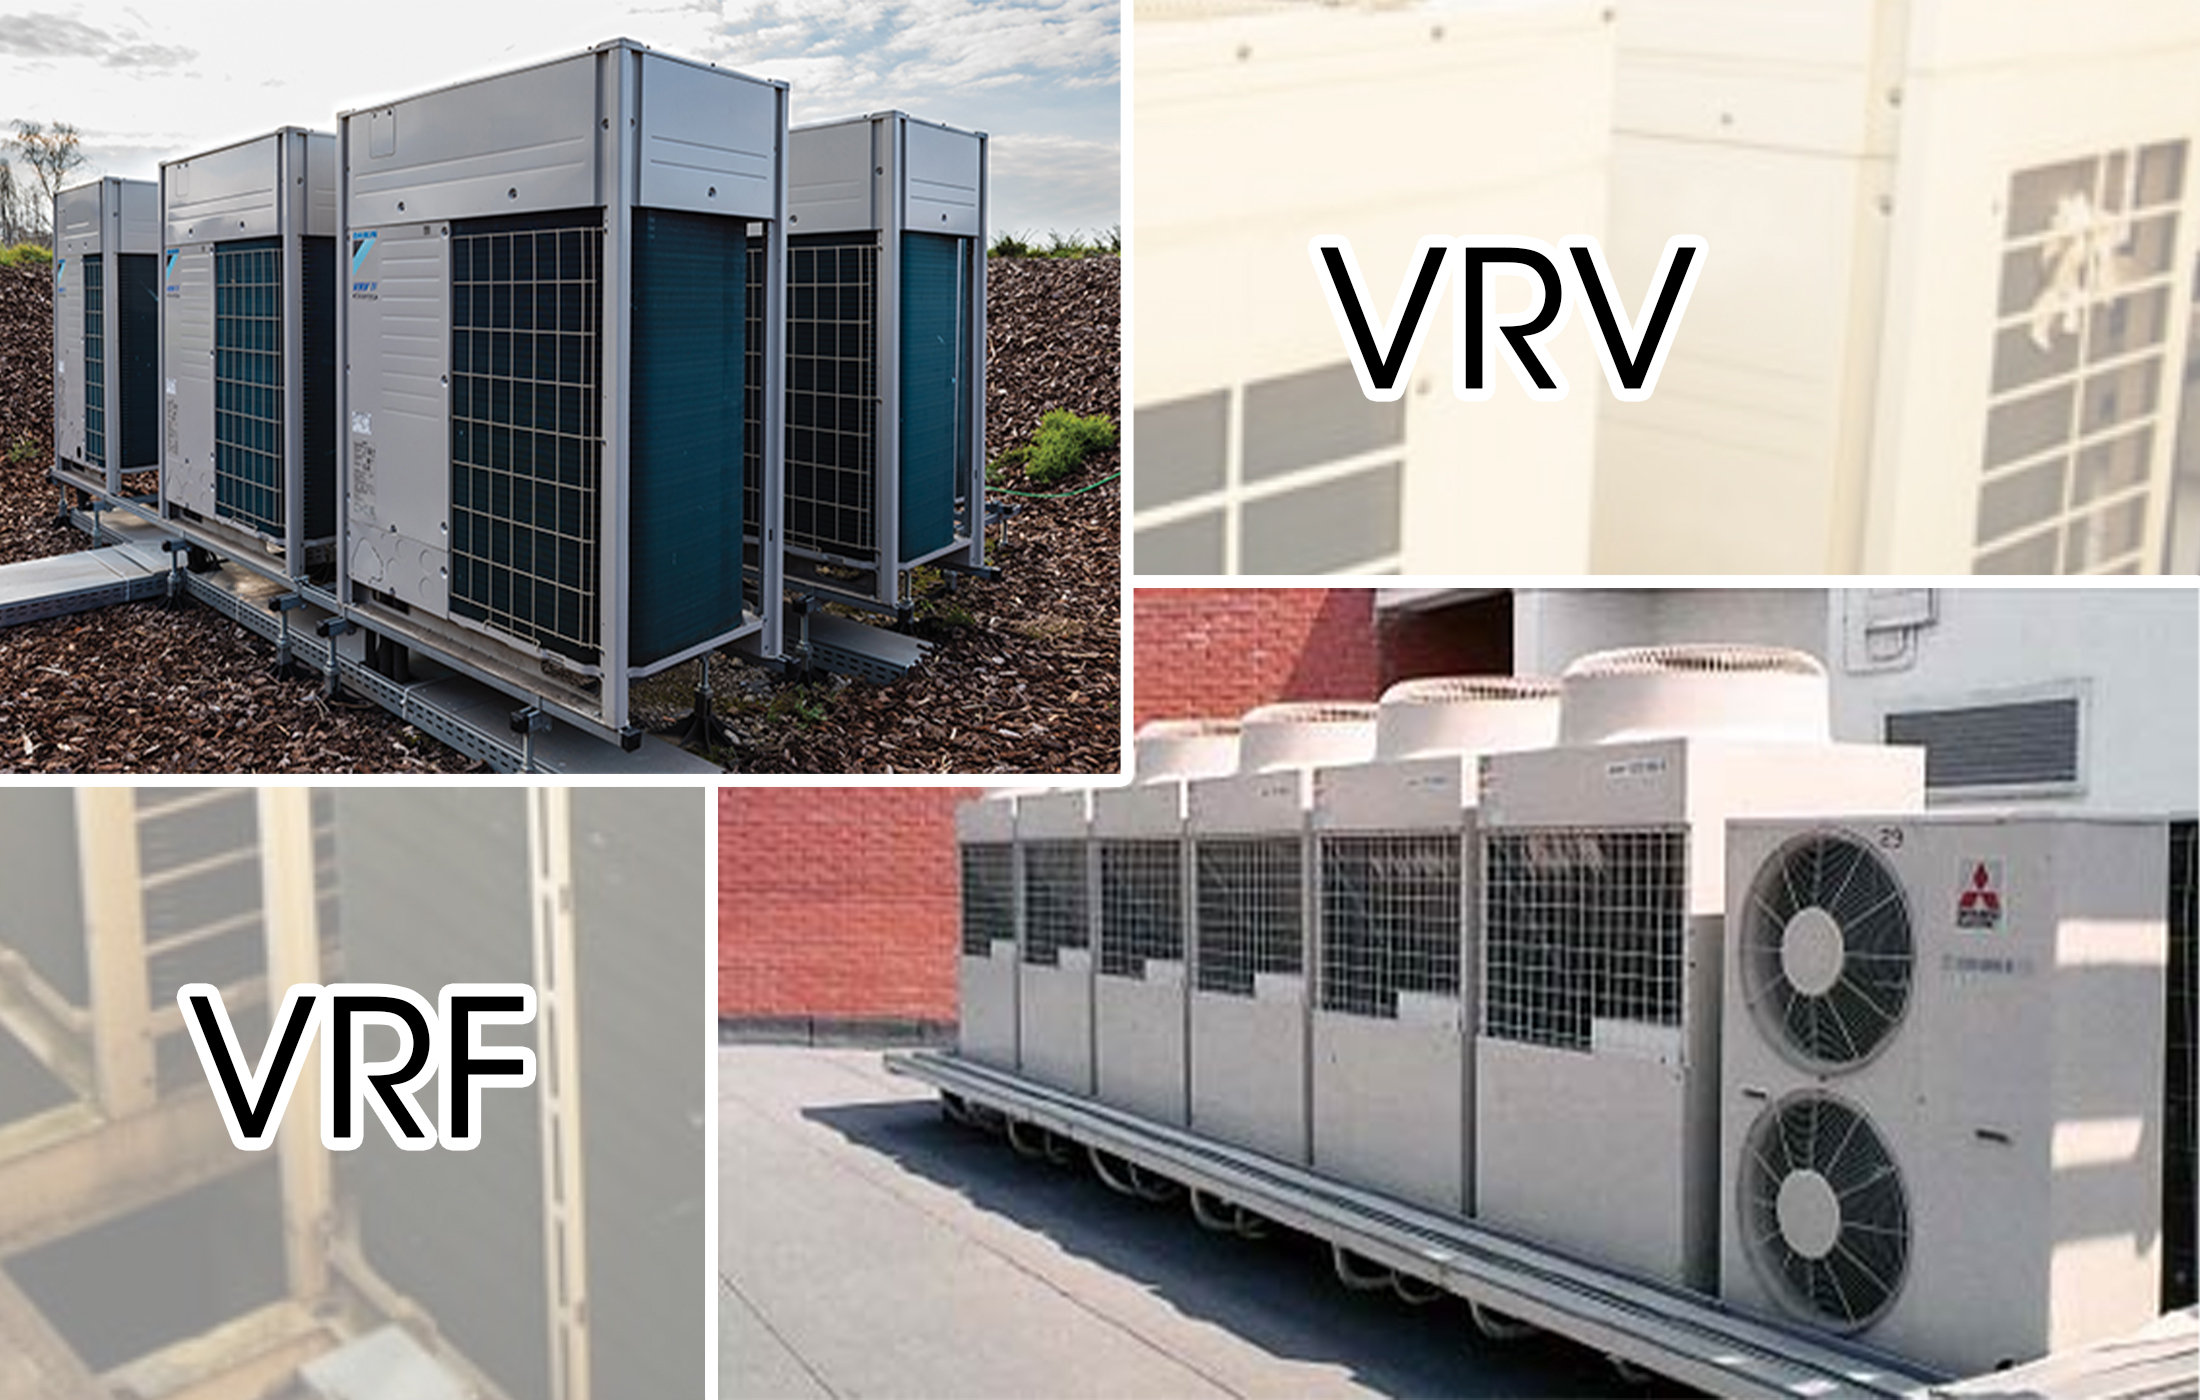 What is the Difference between Vrf And Vrv Air Conditioning?